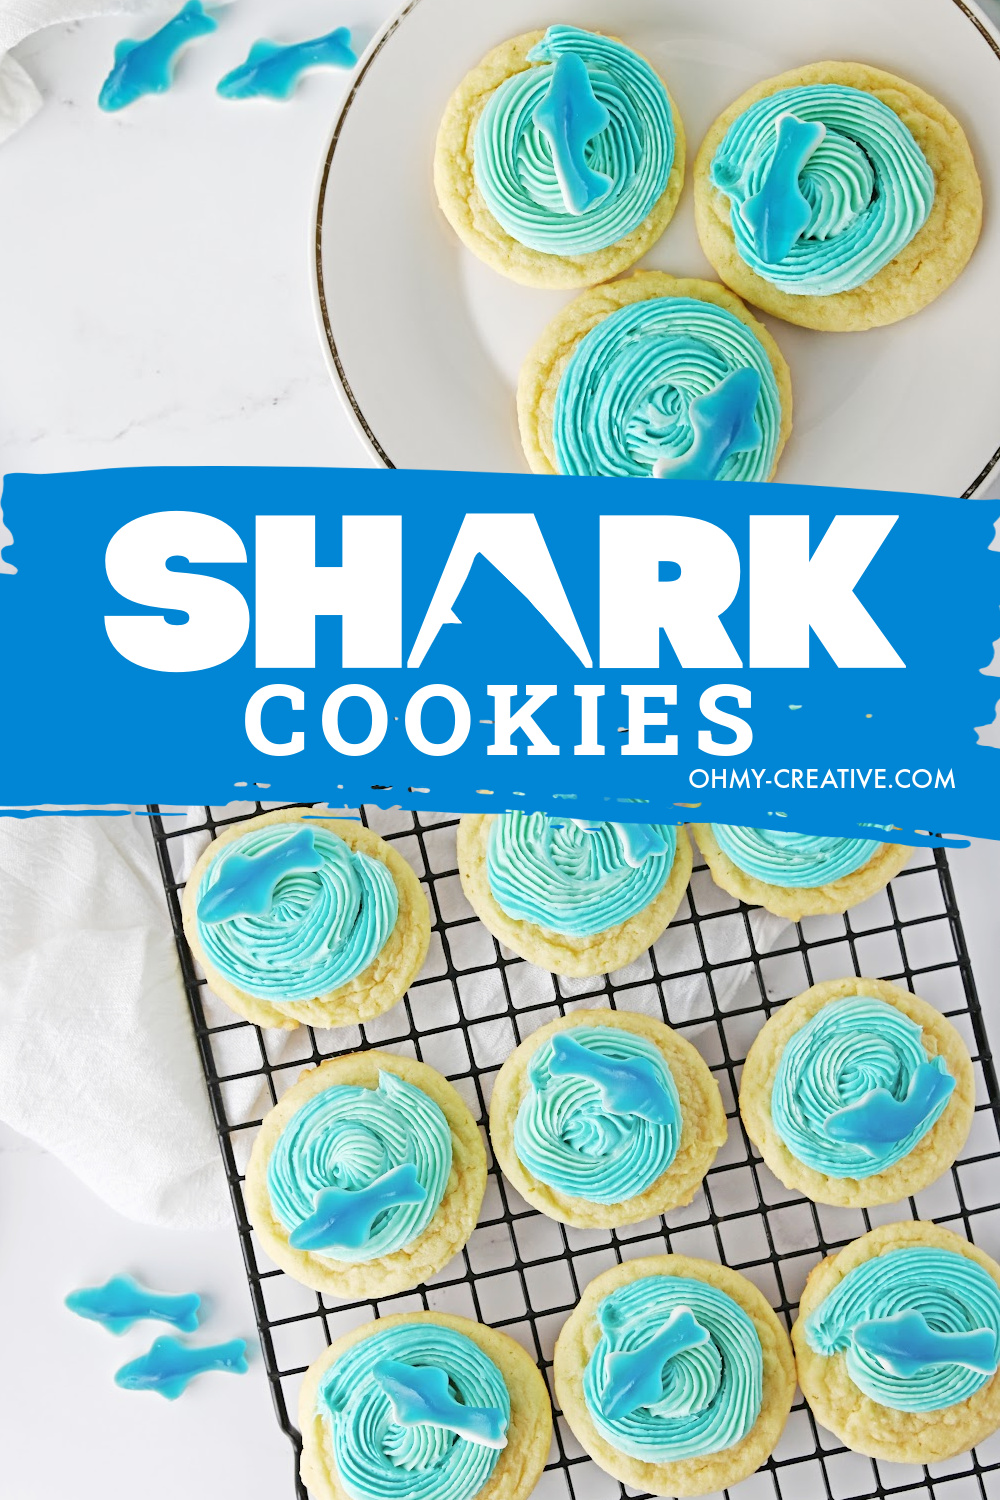 Shark cookies on a white plate and cookies on a cooling rack with blue icing and a gummy shark.